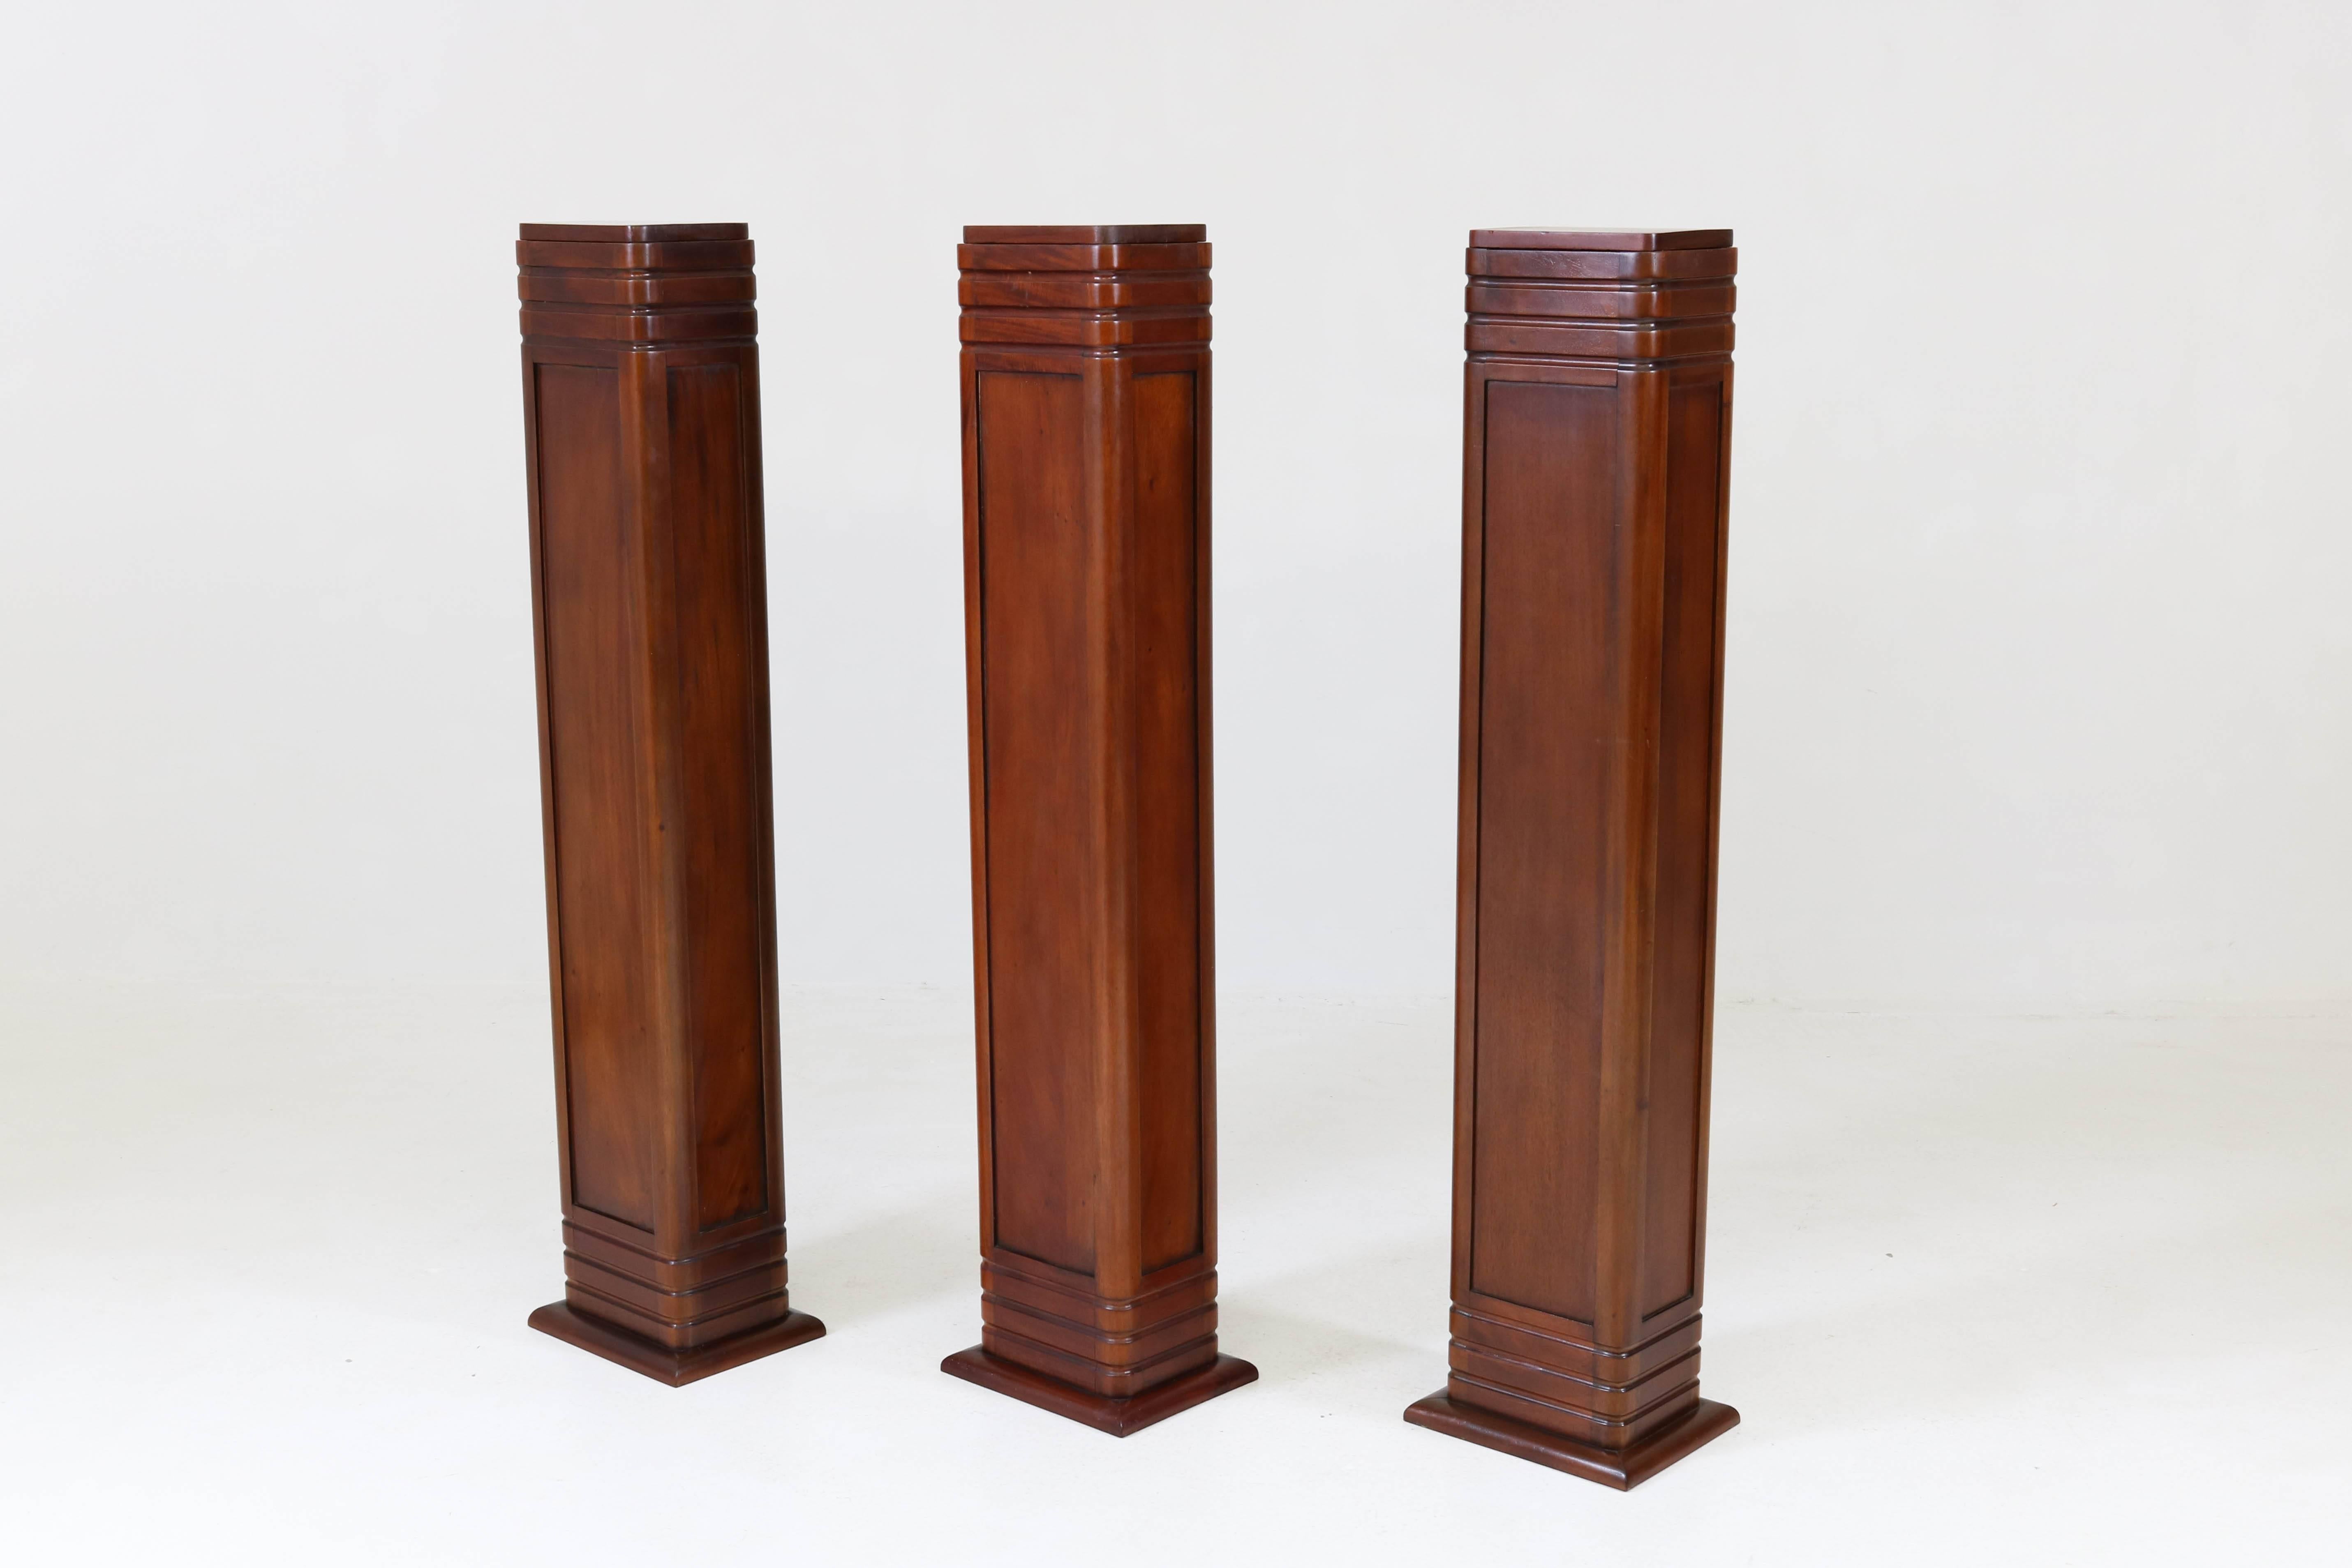 Stylish Art Deco Amsterdam School style pedestal, 1990s.
Striking design in solid mahogany.
We have three pedestals for sale.
Measurements top: 24 cm. / 9.45 in. by 18 cm./ 7.09 in.
In good original condition with minor wear consistent with age